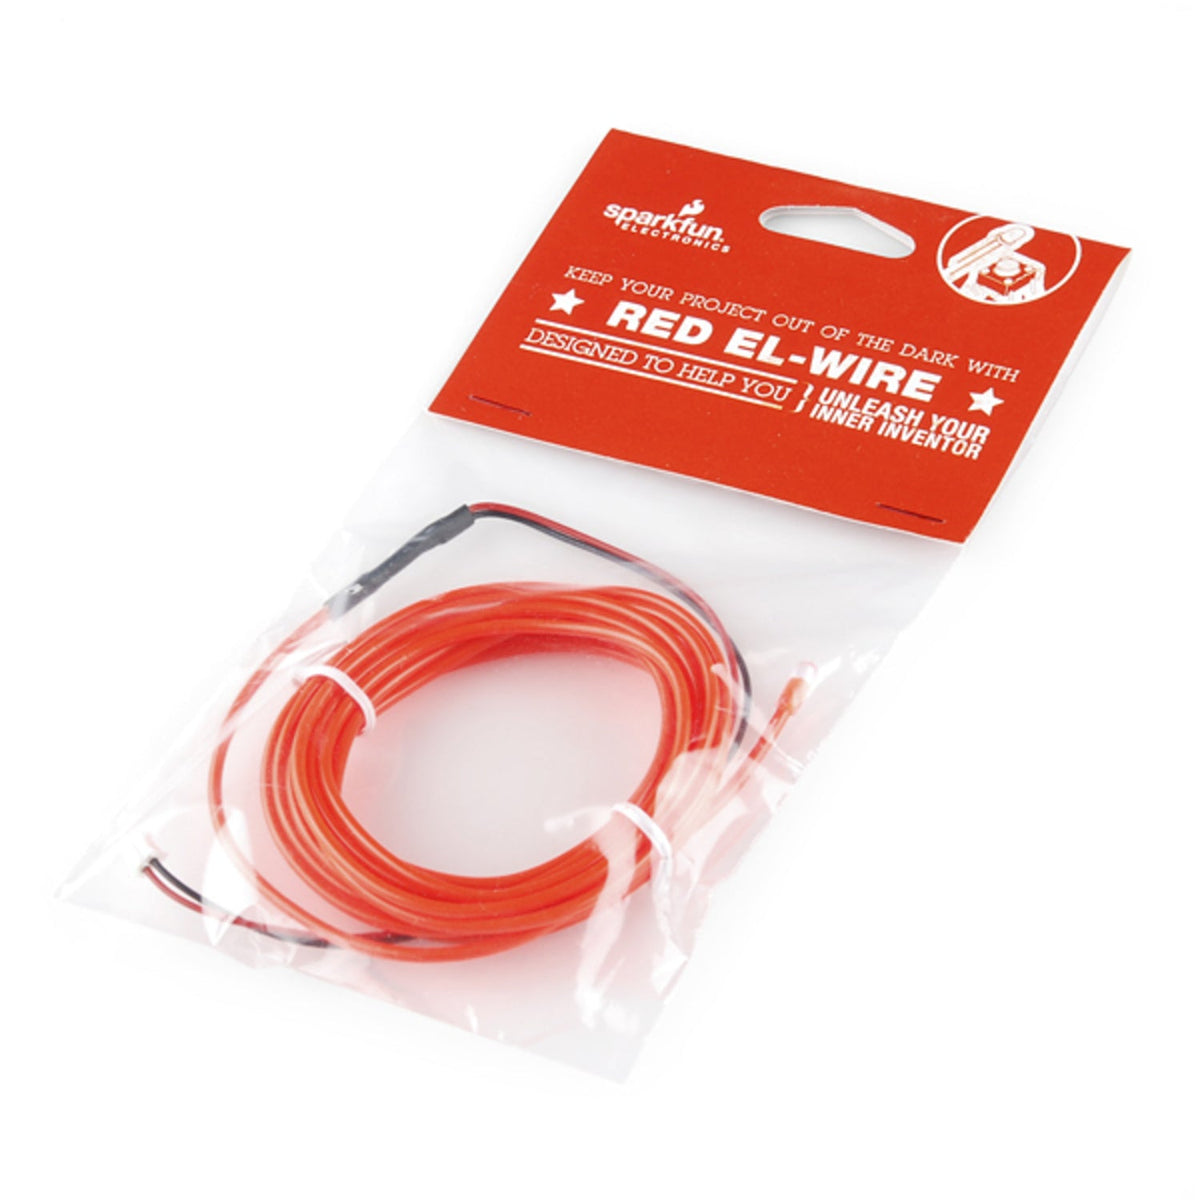 EL Wire - Red 3m (Chasing) - COM-12931 - SparkFun Electronics